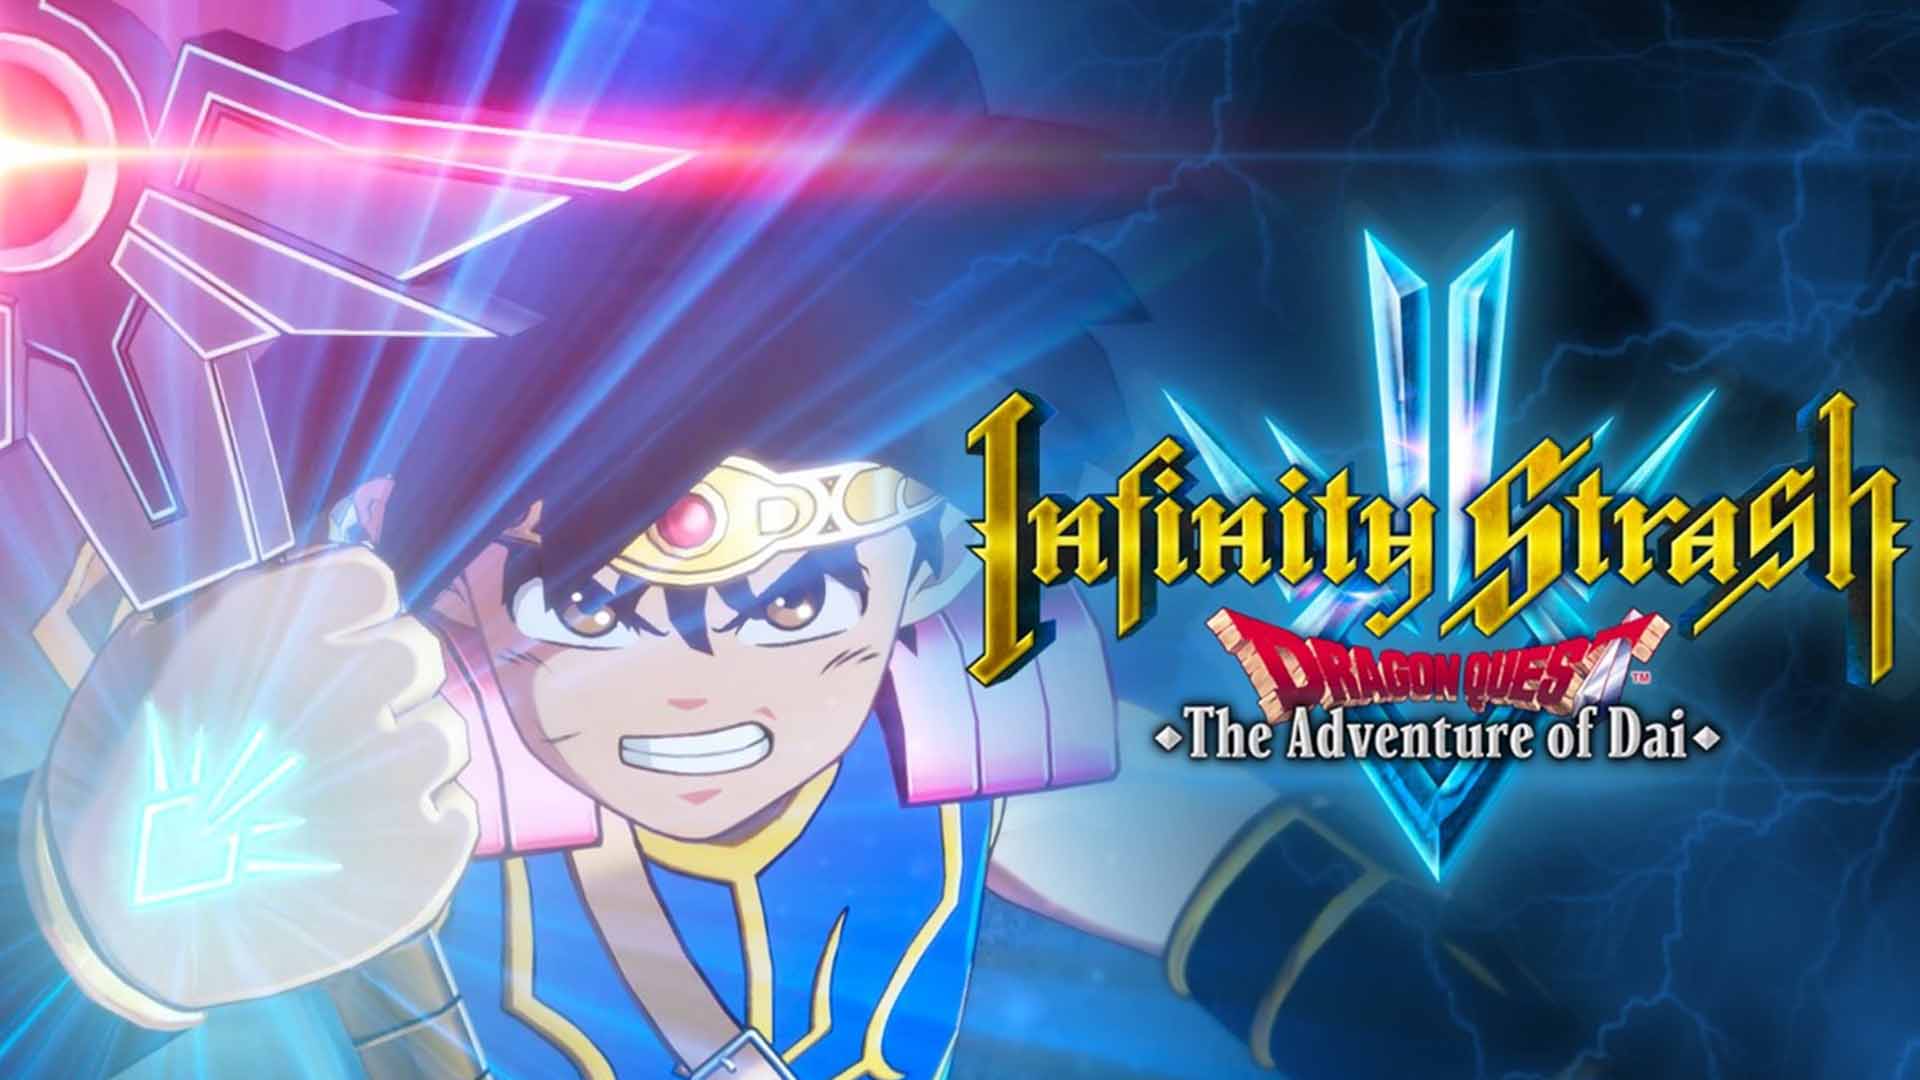 Infinity Strash Dragon Quest The Adventure of Dai coming to the West